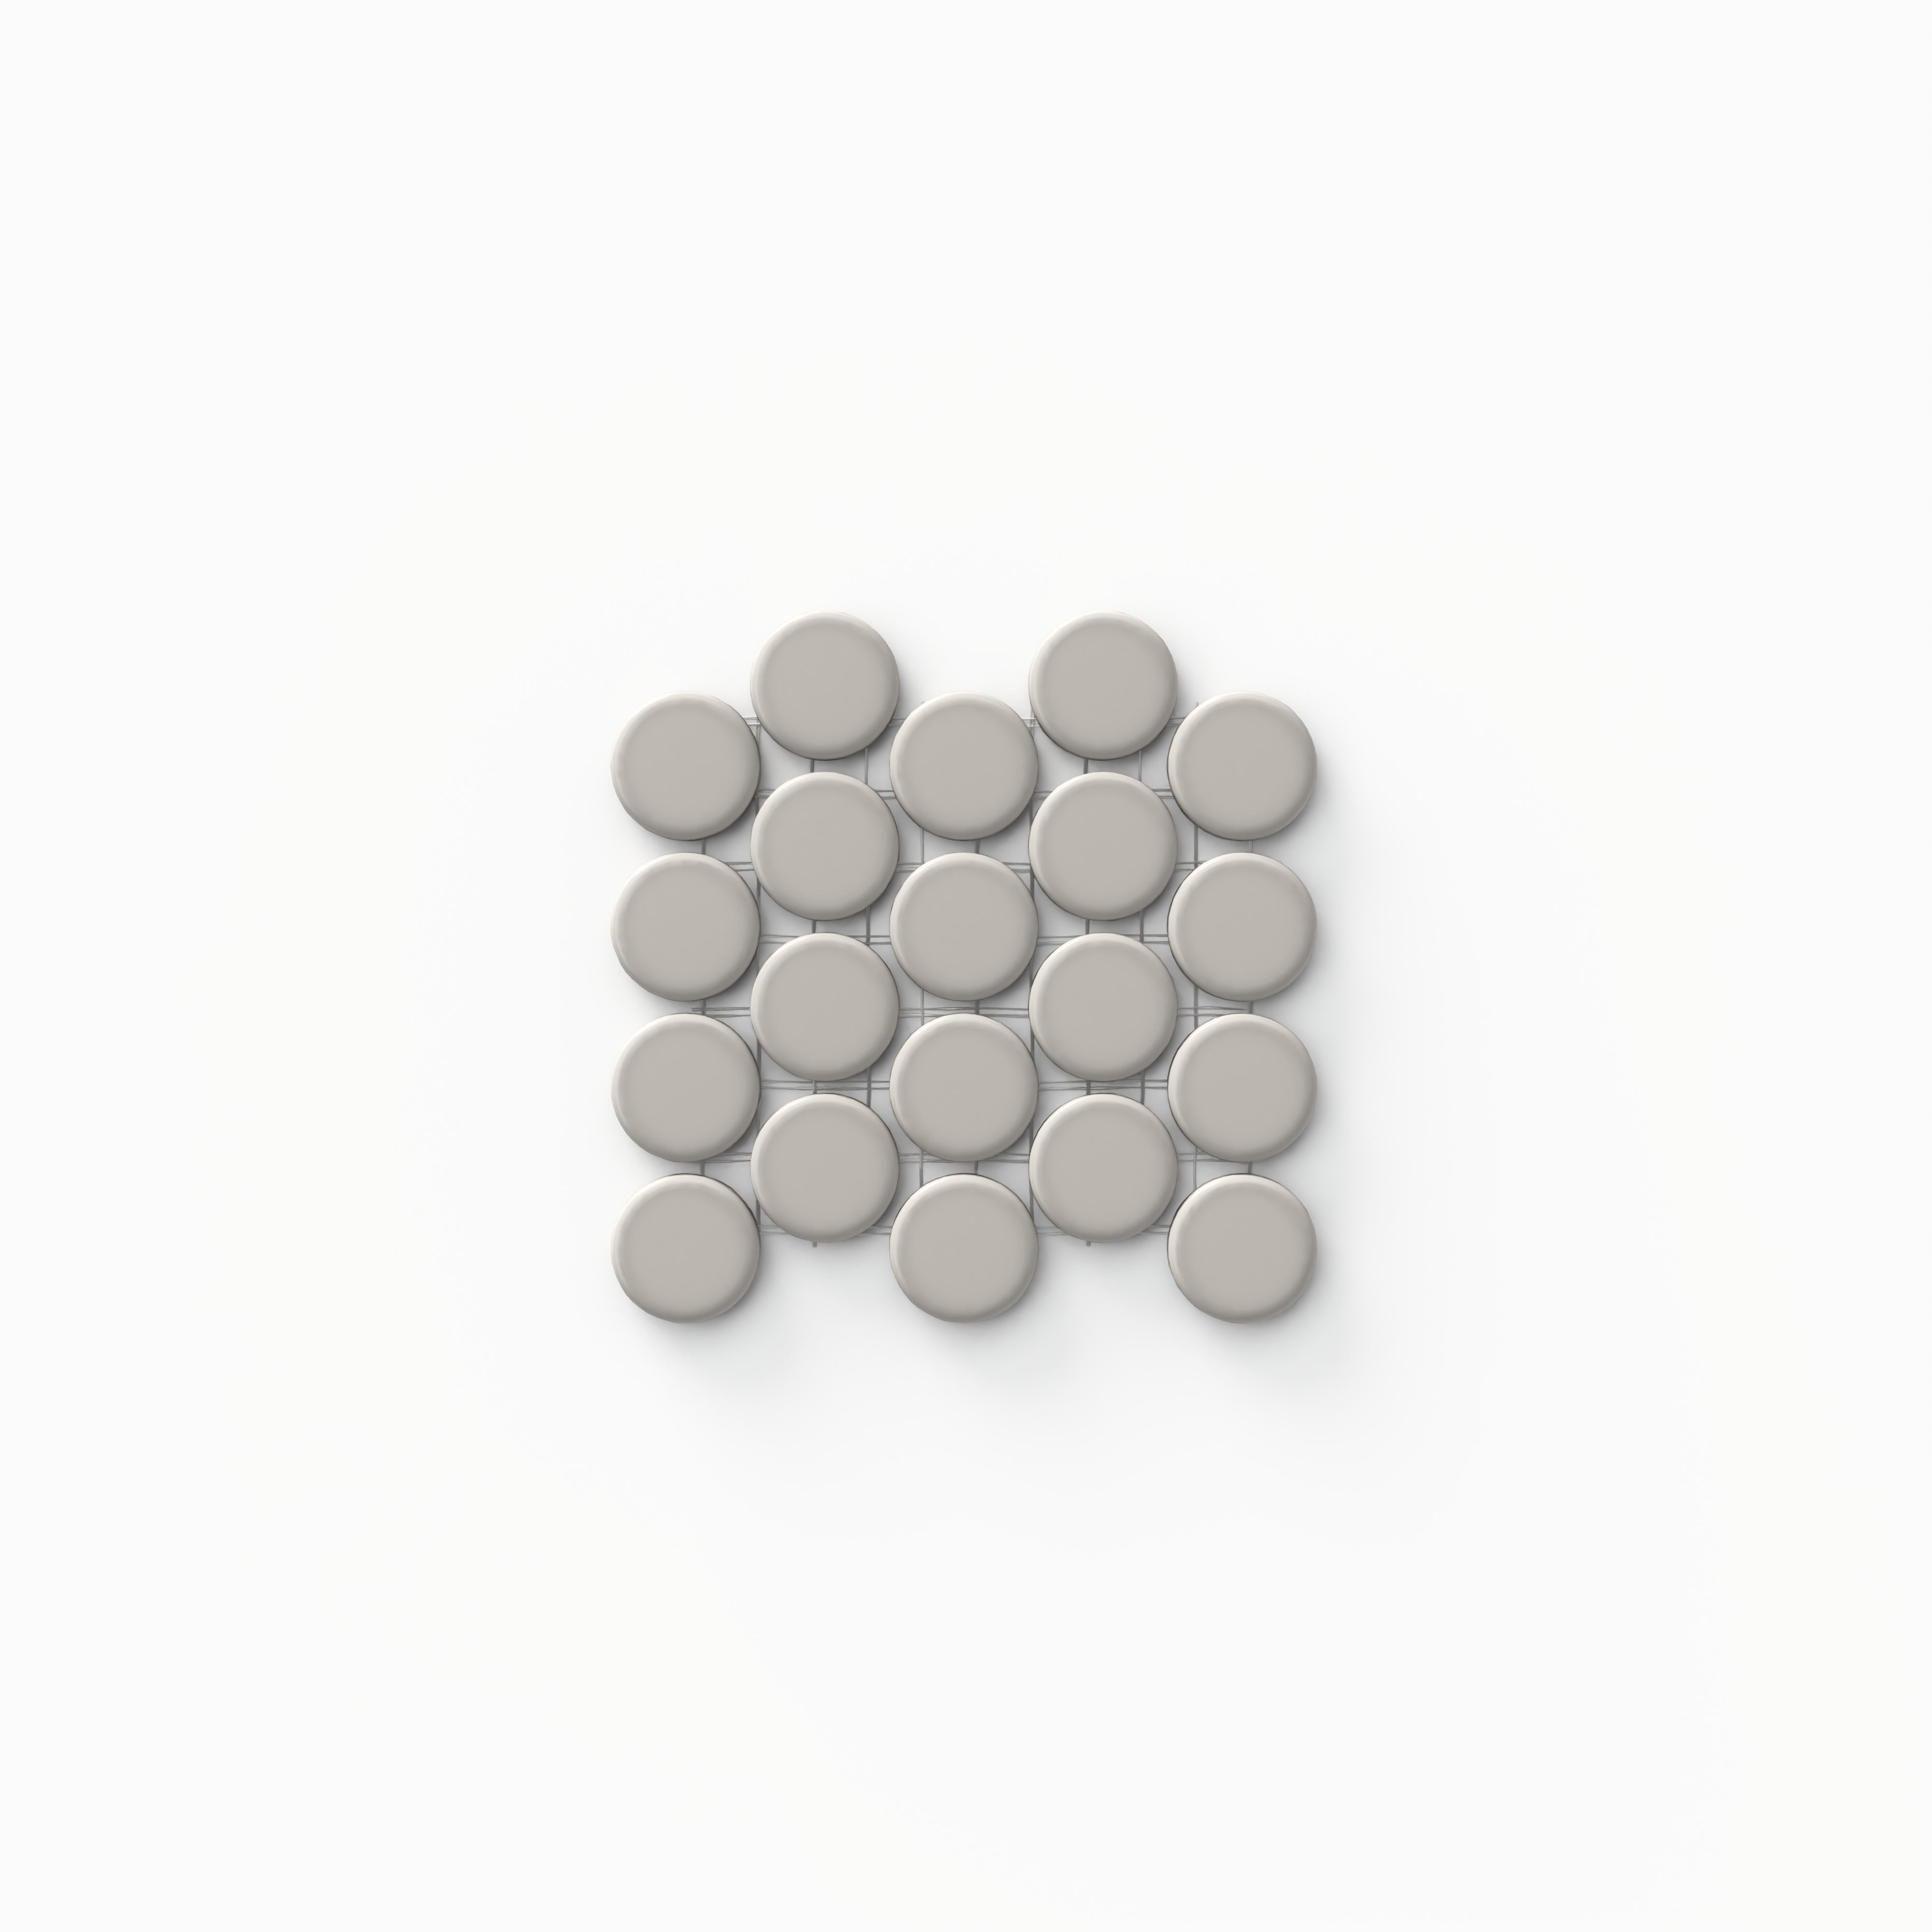 Ollie 3/4x3/4 Matte Porcelain Mosaic Penny Round Tile in Grey Sample